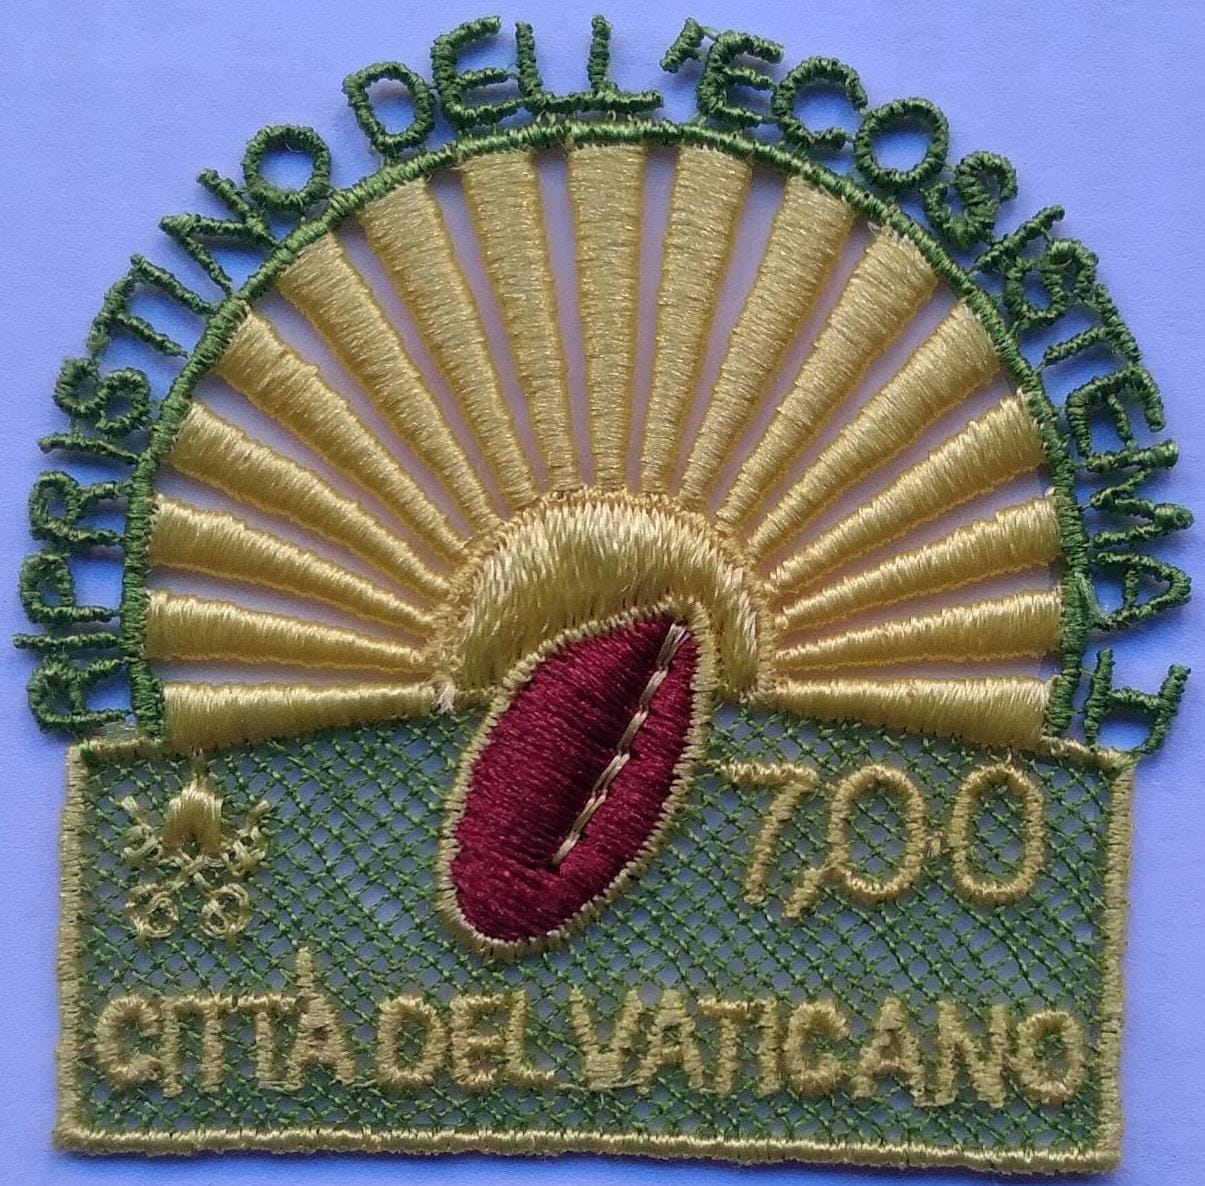 Vatican embroidery stamp made from recycled plastic bottles.